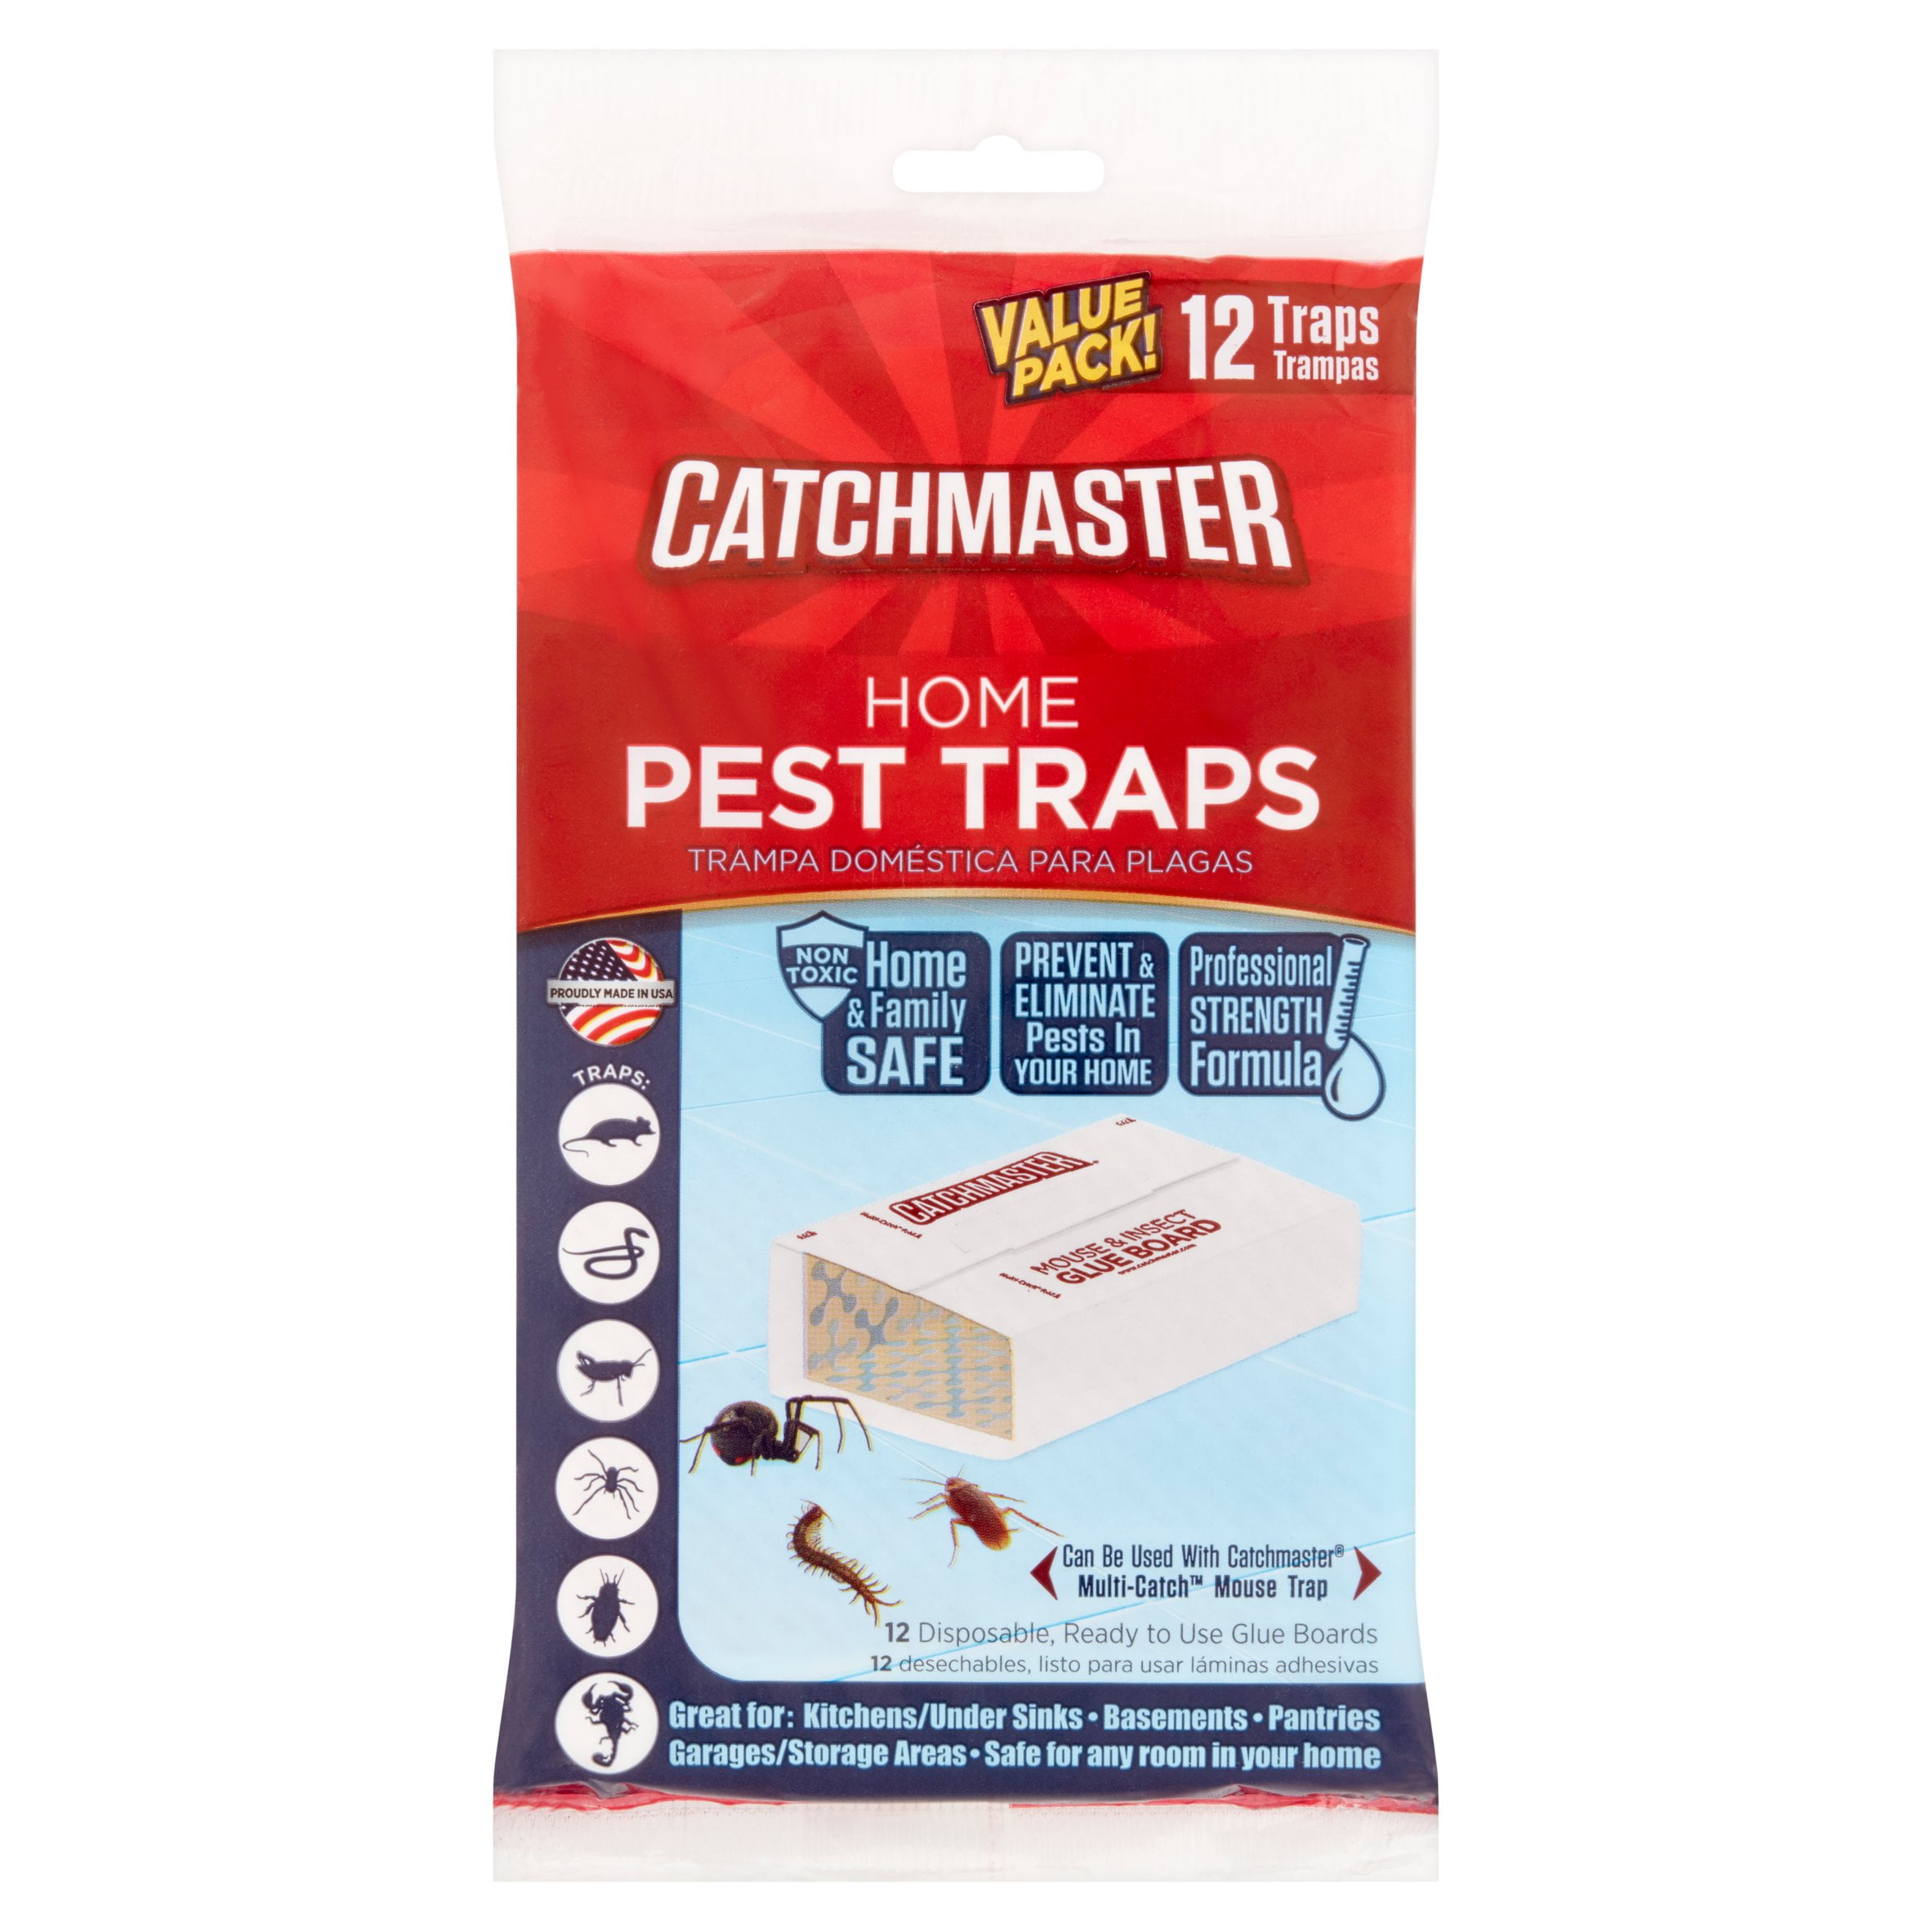 Catchmaster Value Pack Home Pest Traps, 12 Count